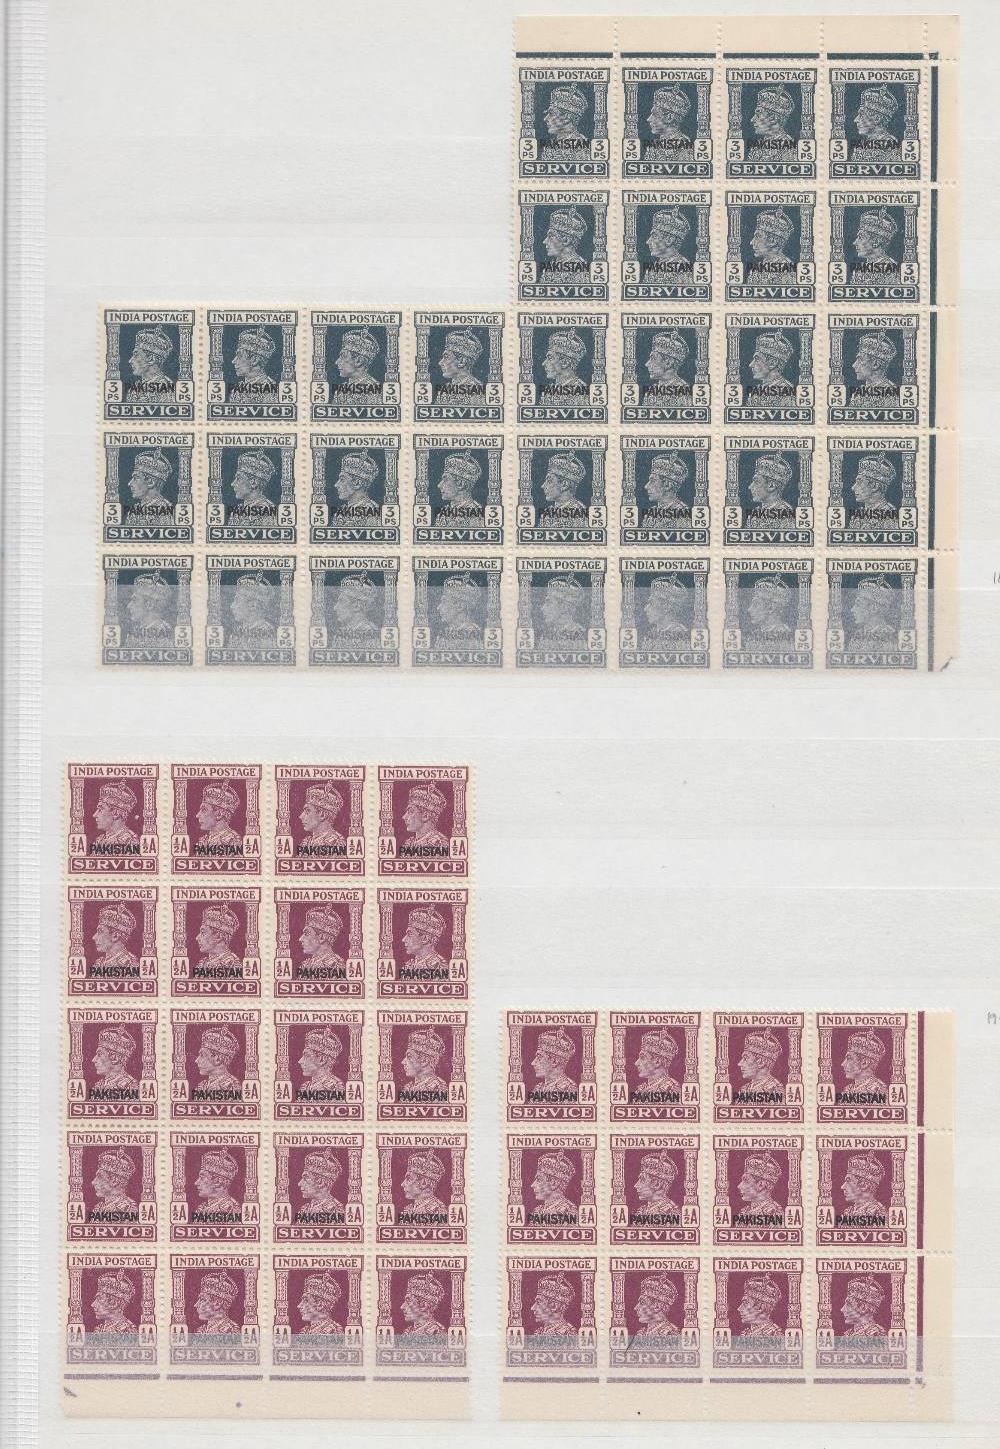 STAMPS PAKISTAN 1947 George VI Official stamps.